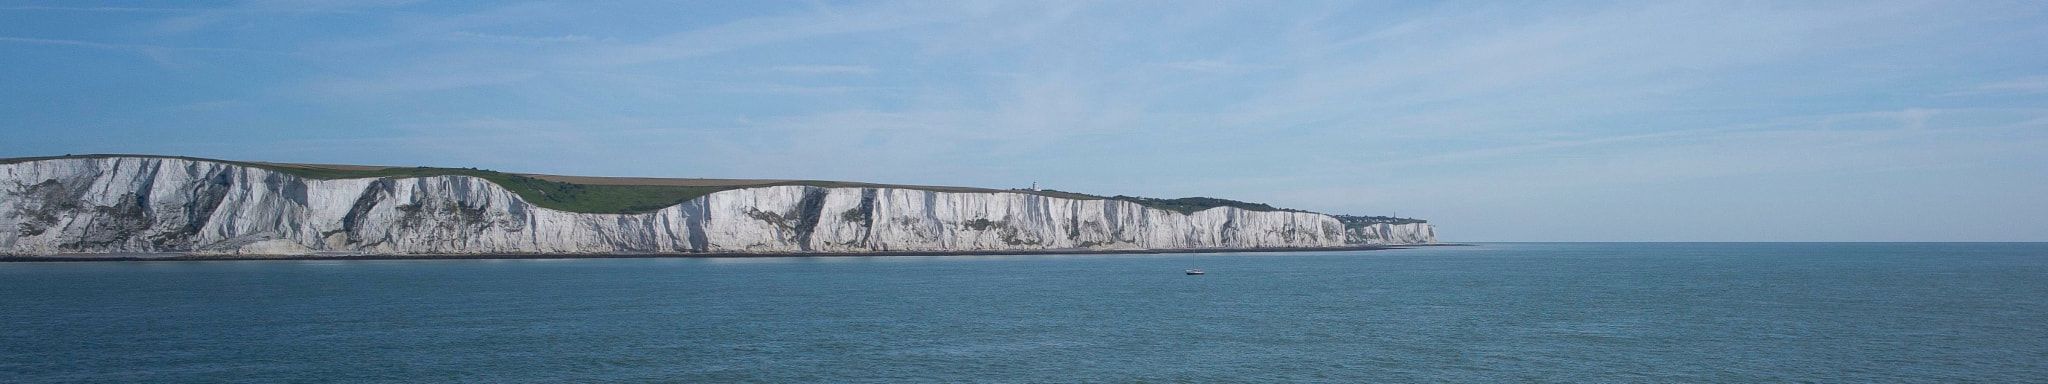 Leica M (Typ 240) + Noctilux-M 1:1/50 sample photo. White cliffs of dover photography